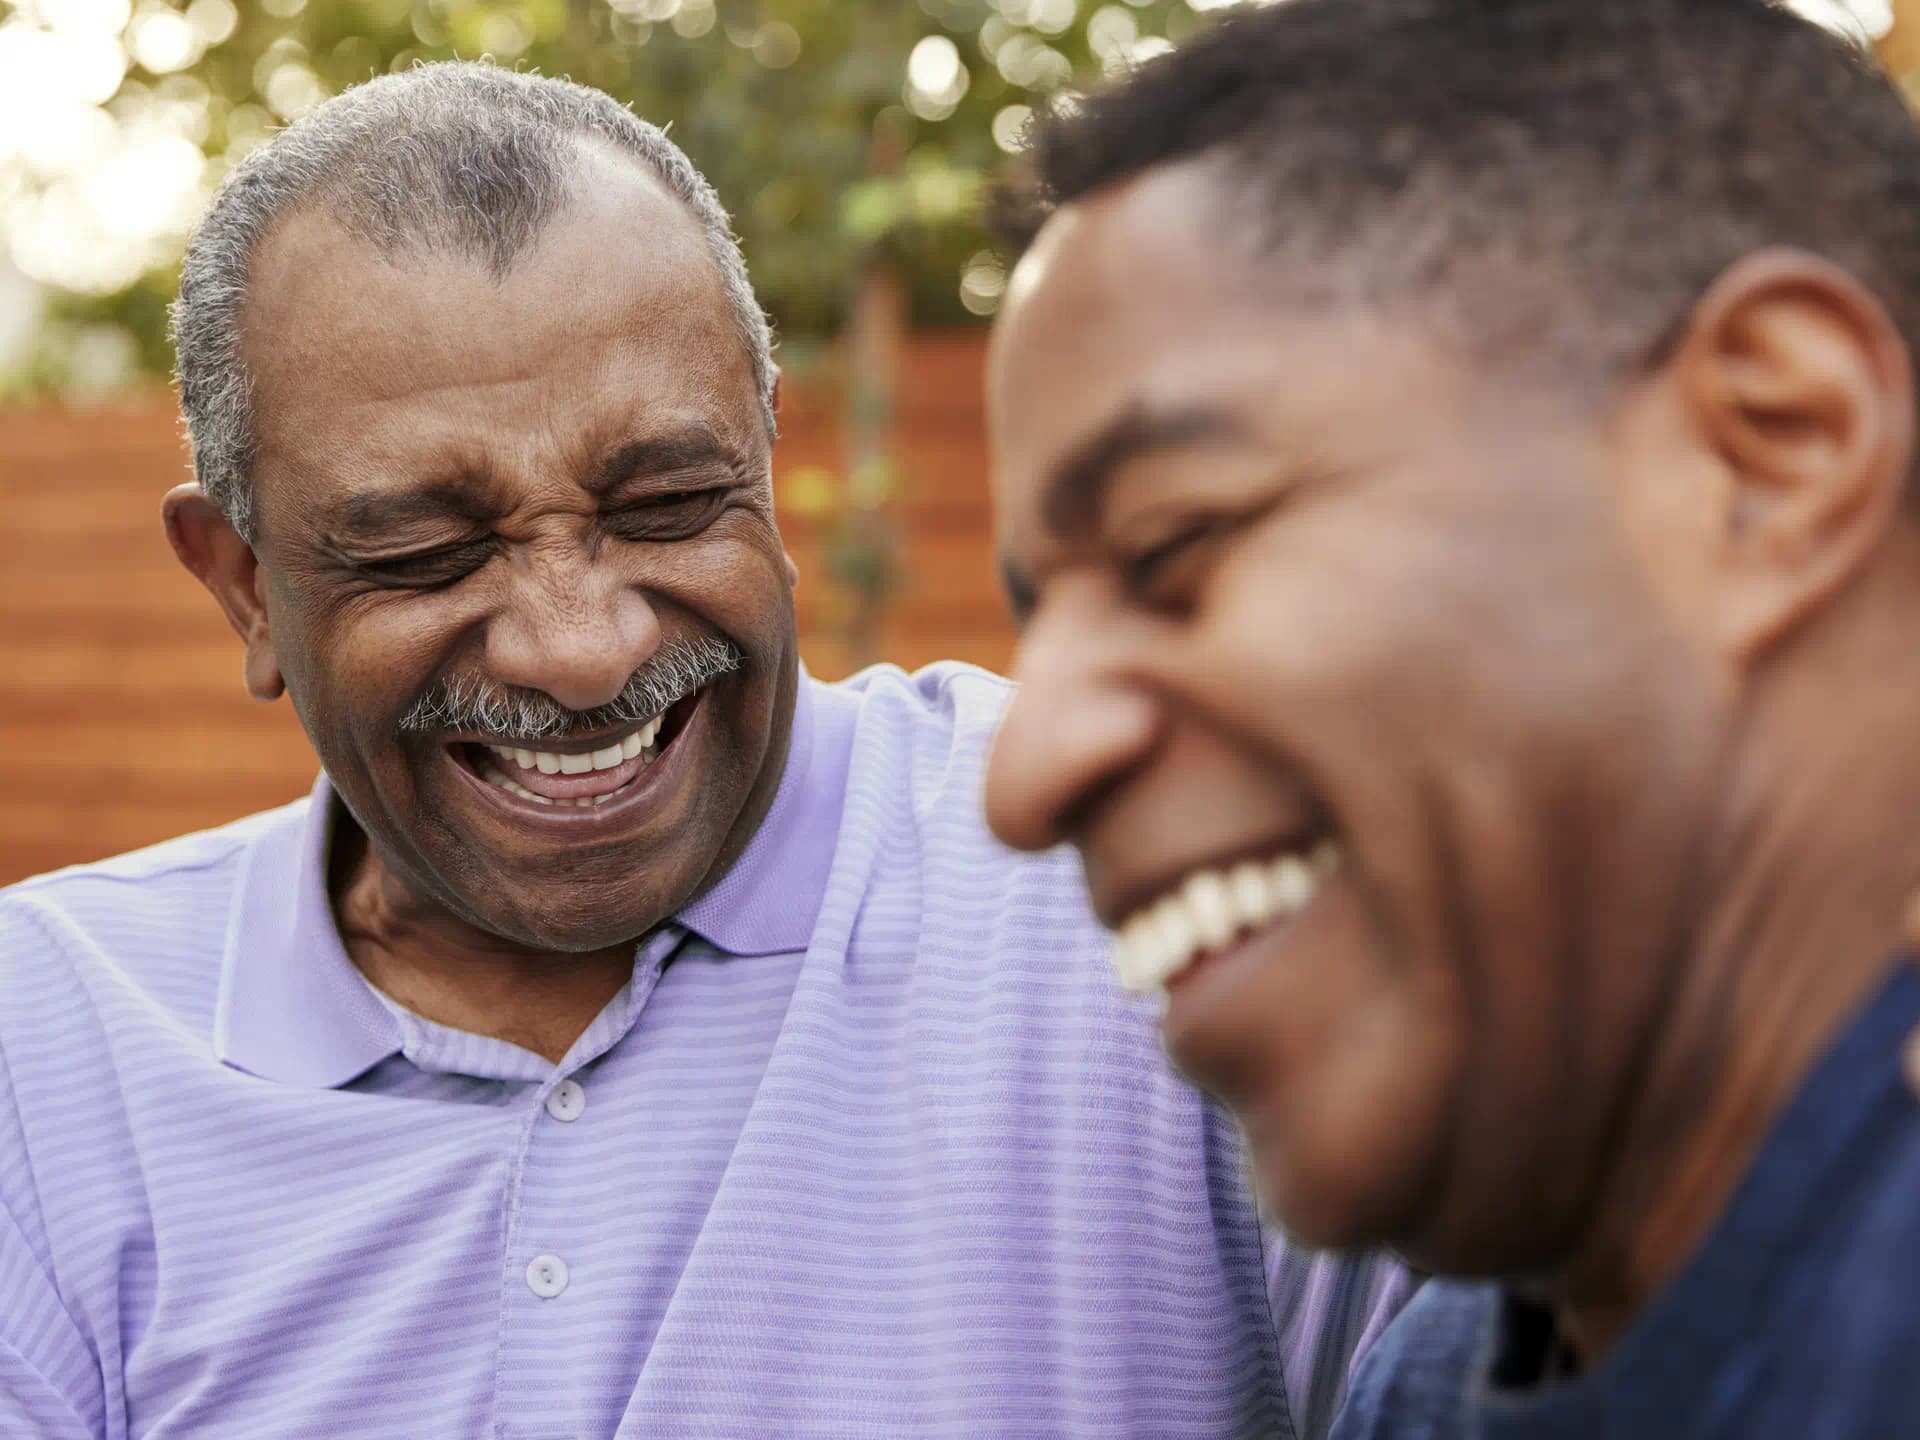 Father and son having a good time while wearing hearing aids